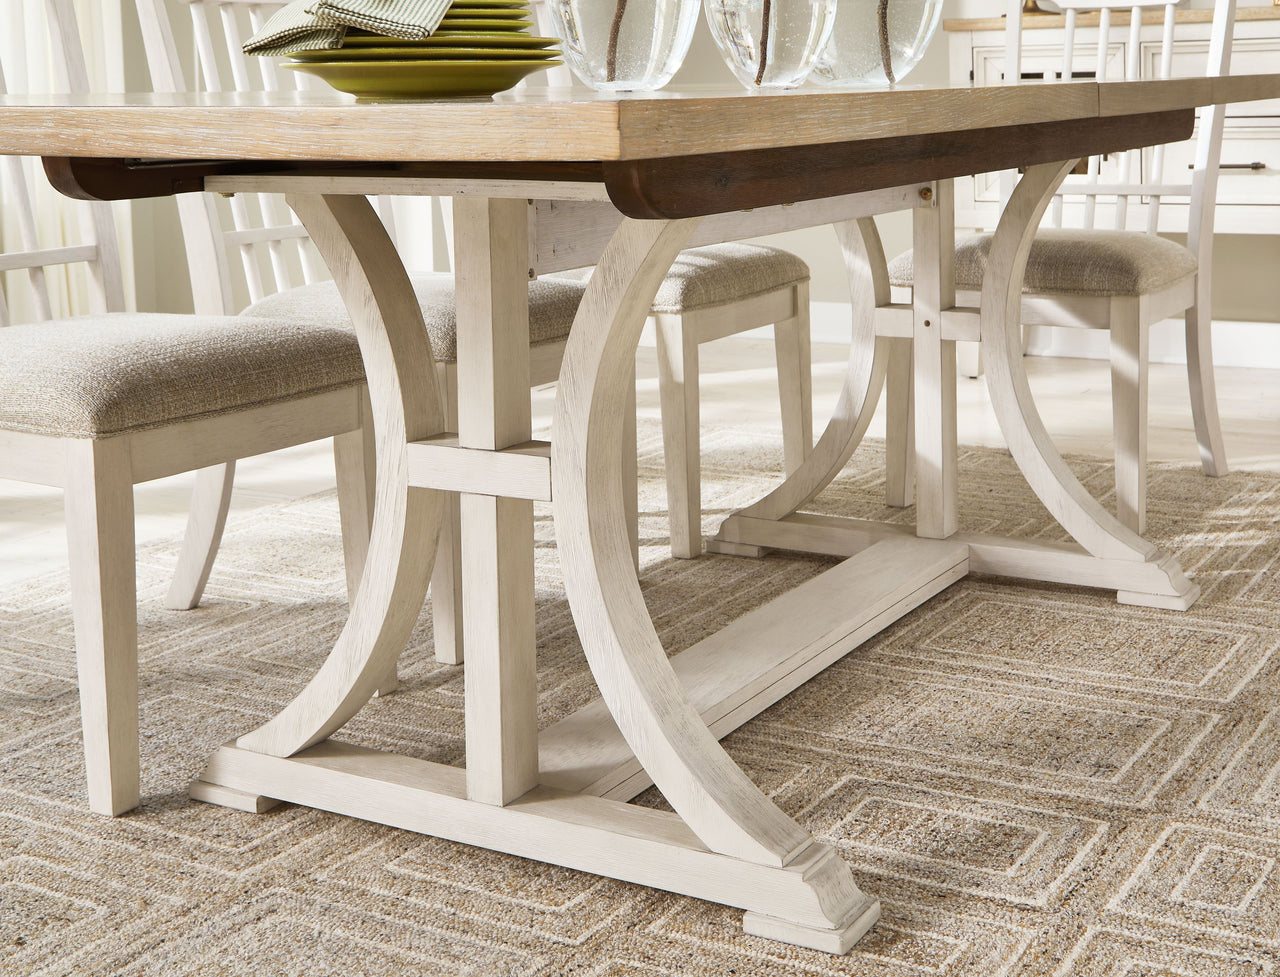 Shaybrock - Antique White / Brown - Rectangular Dining Room Extension Table - Tony's Home Furnishings